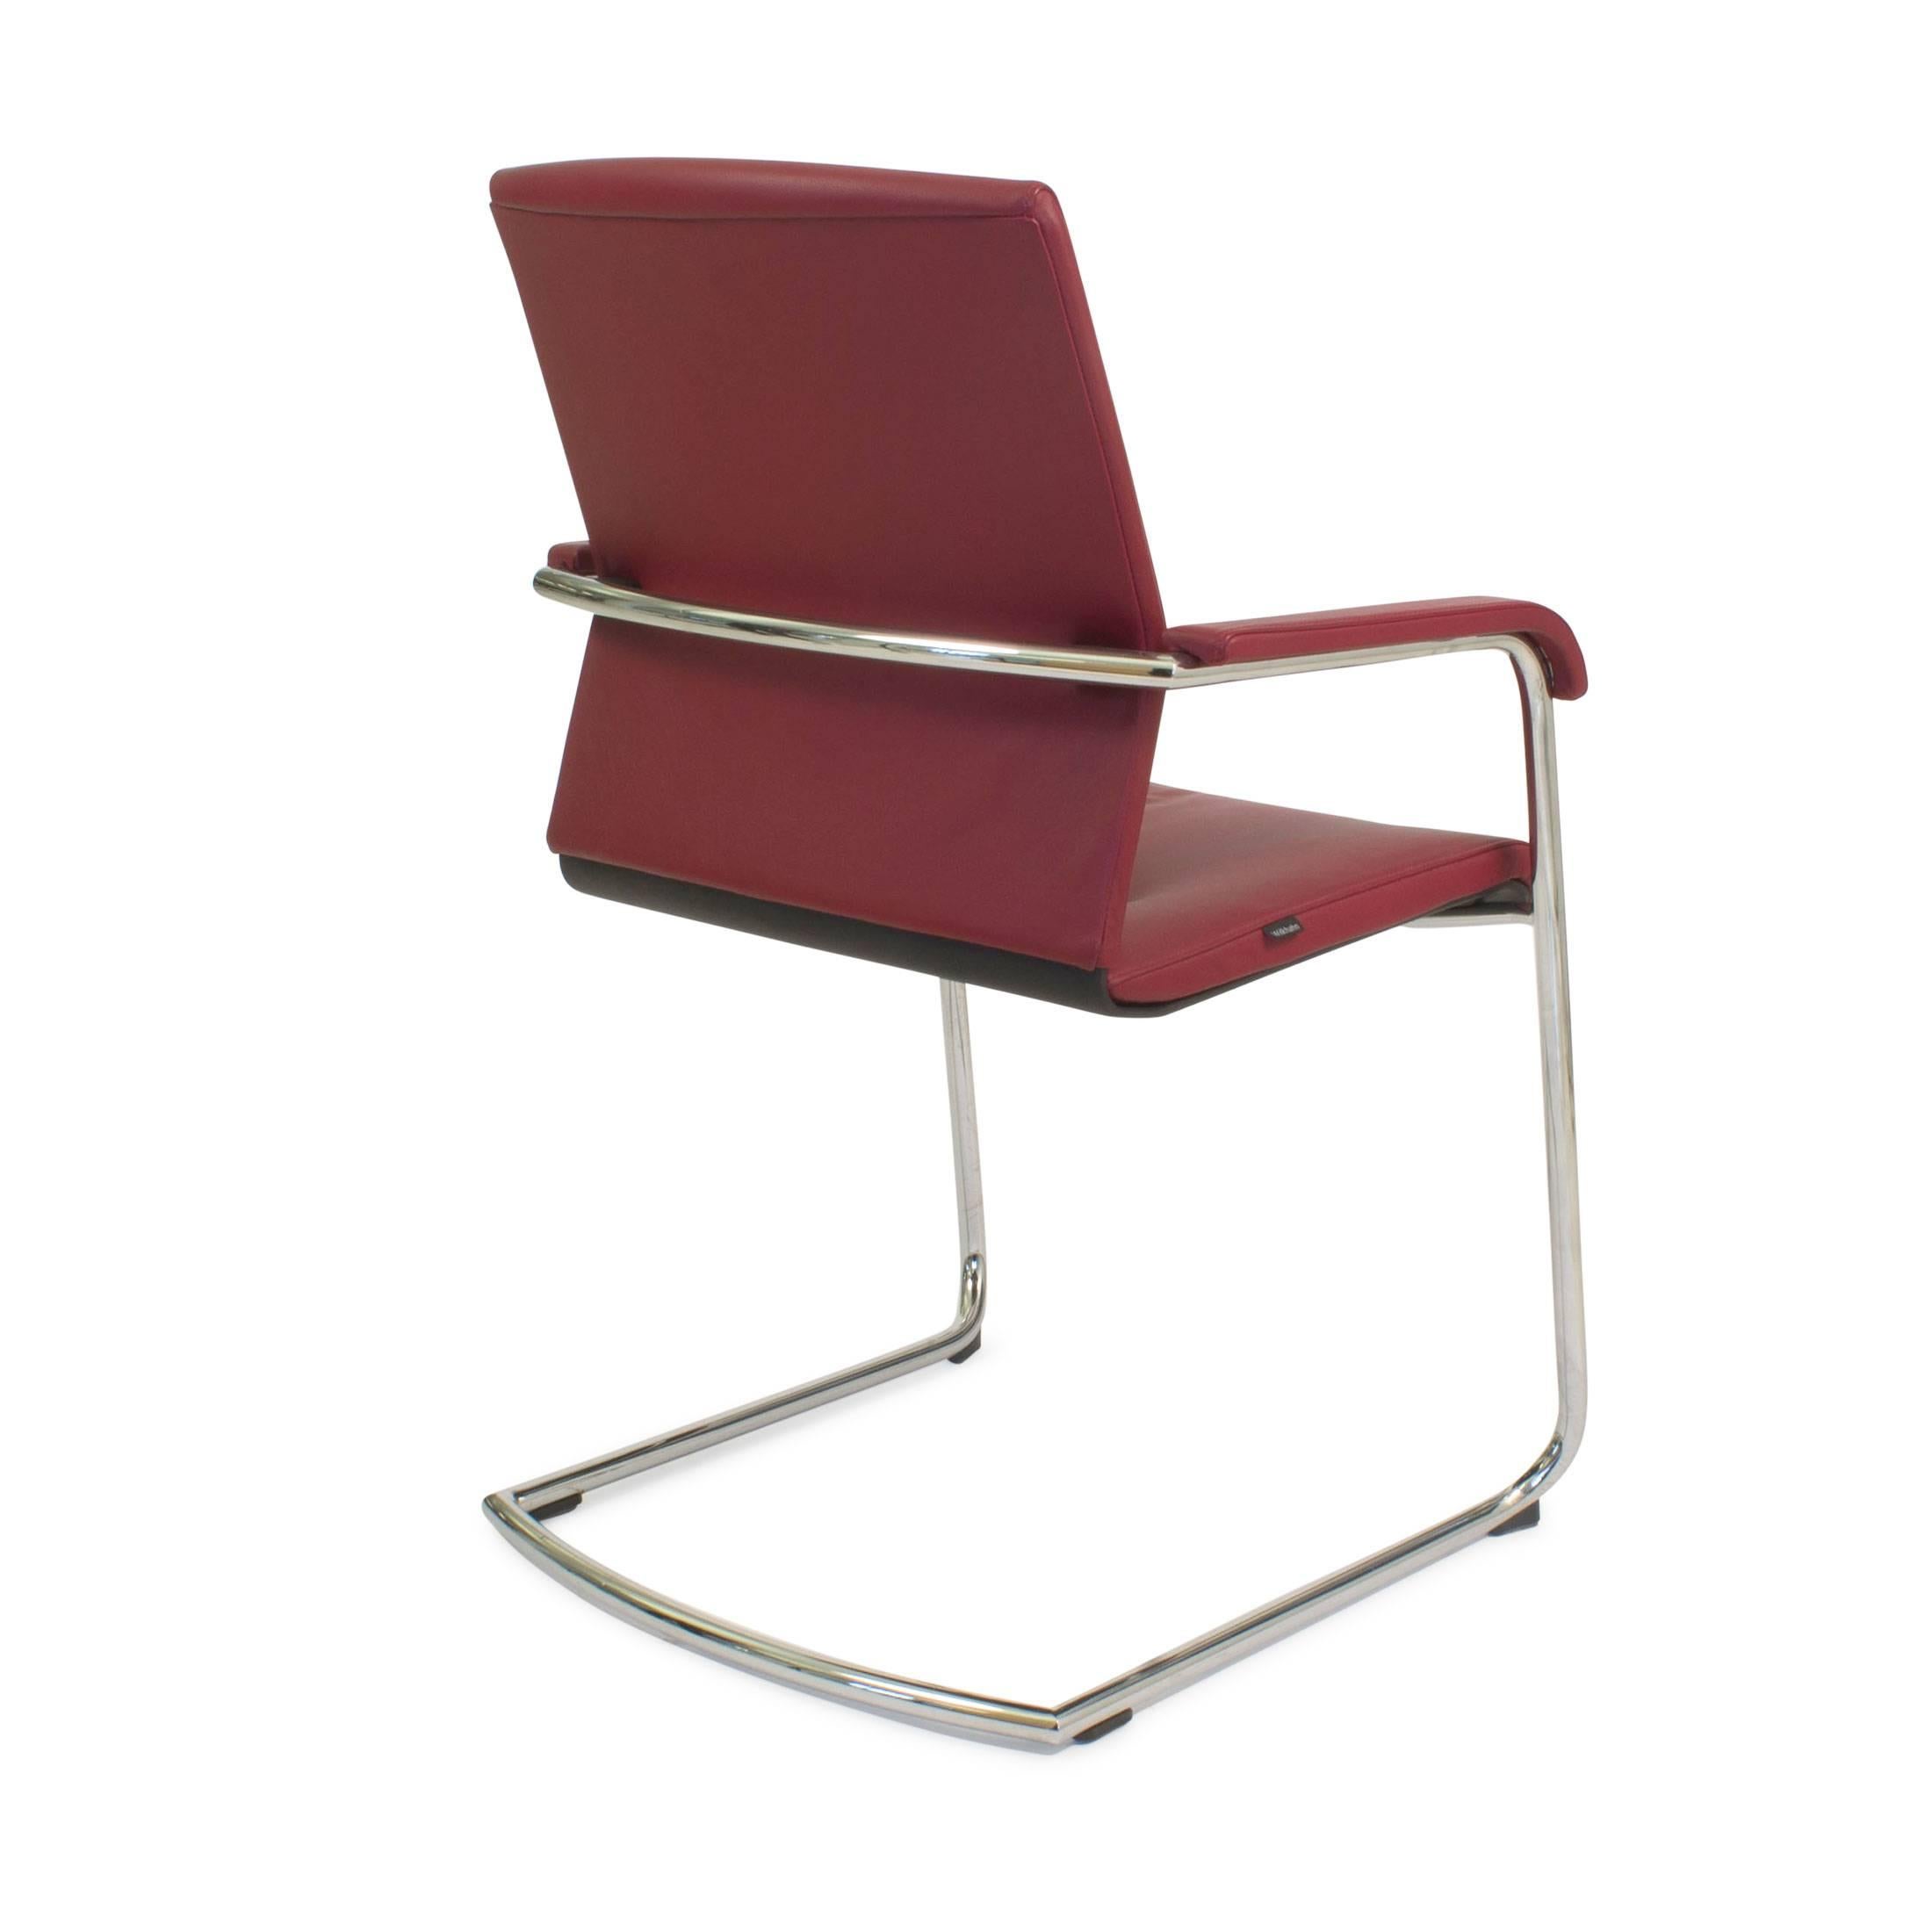 Red Leather ON 178/71 Cantilever Armchair by Wiege for Wilkhahn, Germany In Good Condition For Sale In Brooklyn, NY